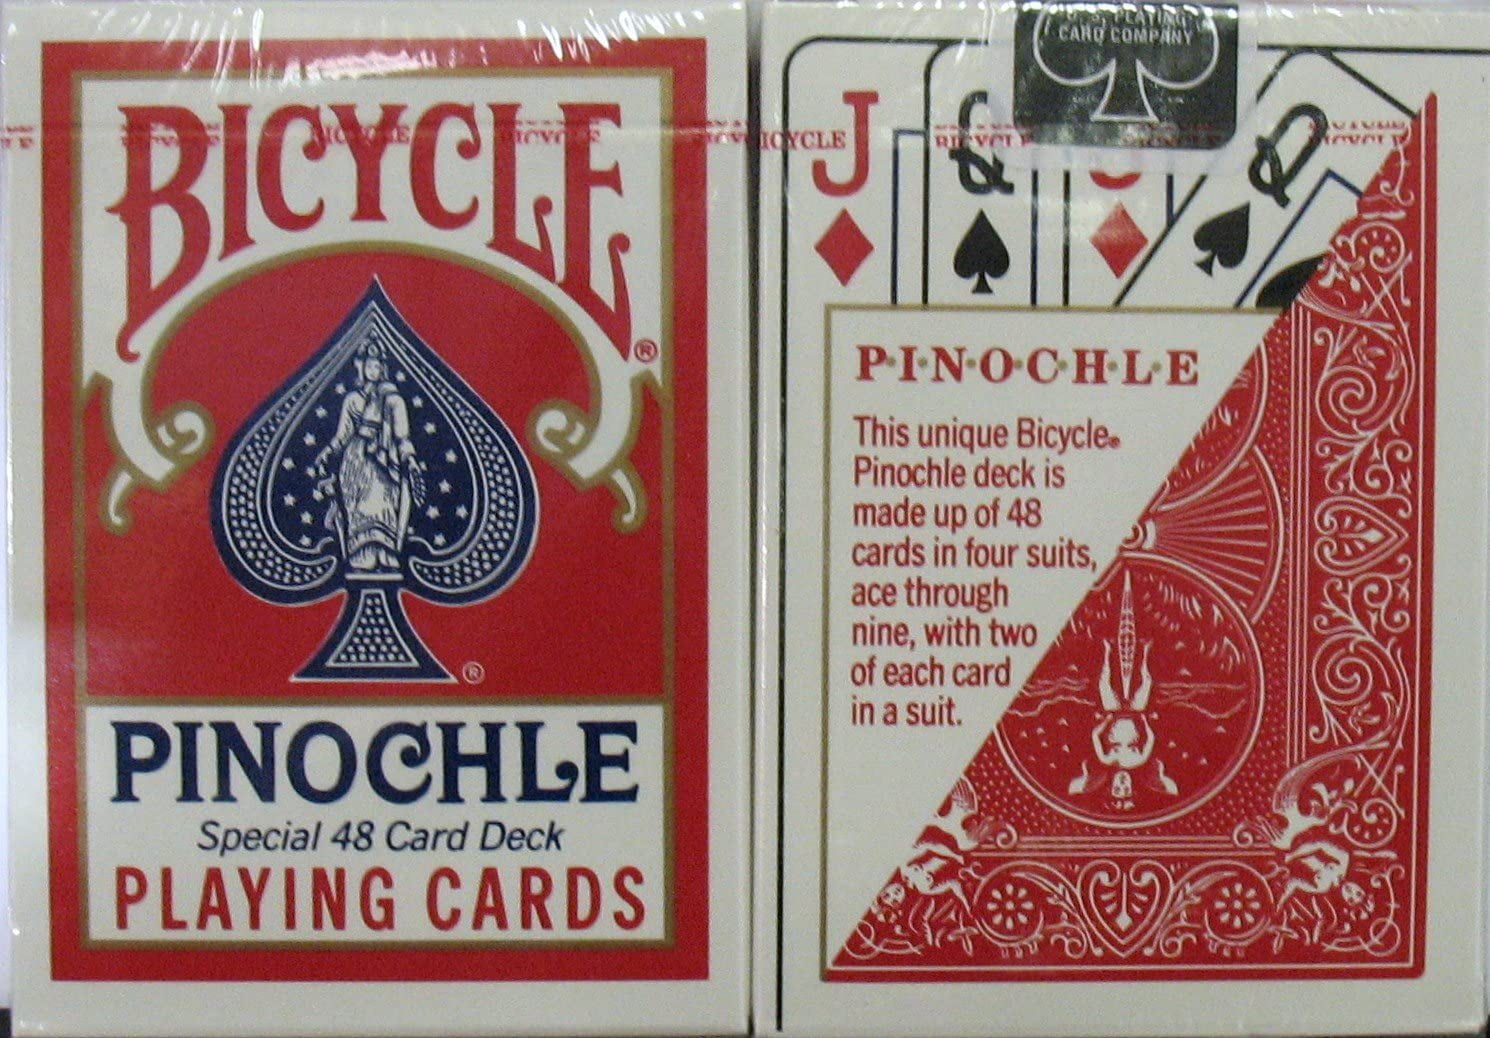 Anicca Deck Metallic Blue Deck Bicycle Playing Cards Poker Size USPCC Limited Ed